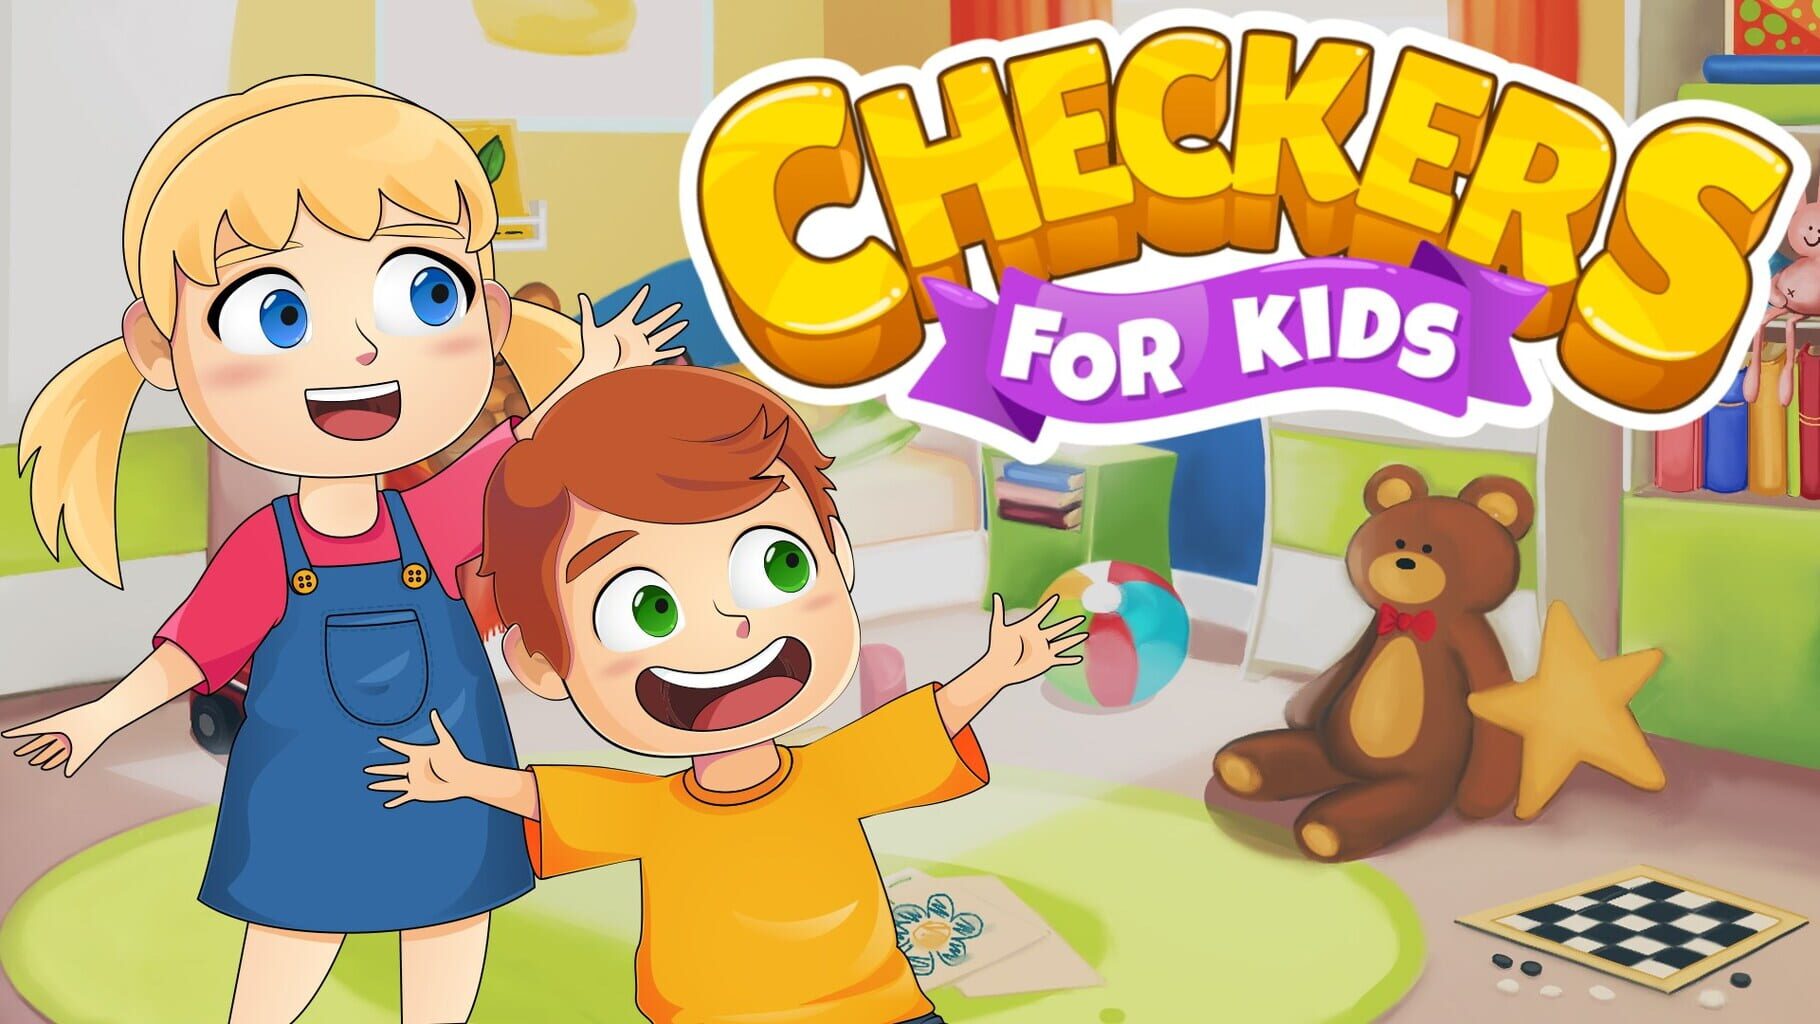 Checkers for Kids artwork